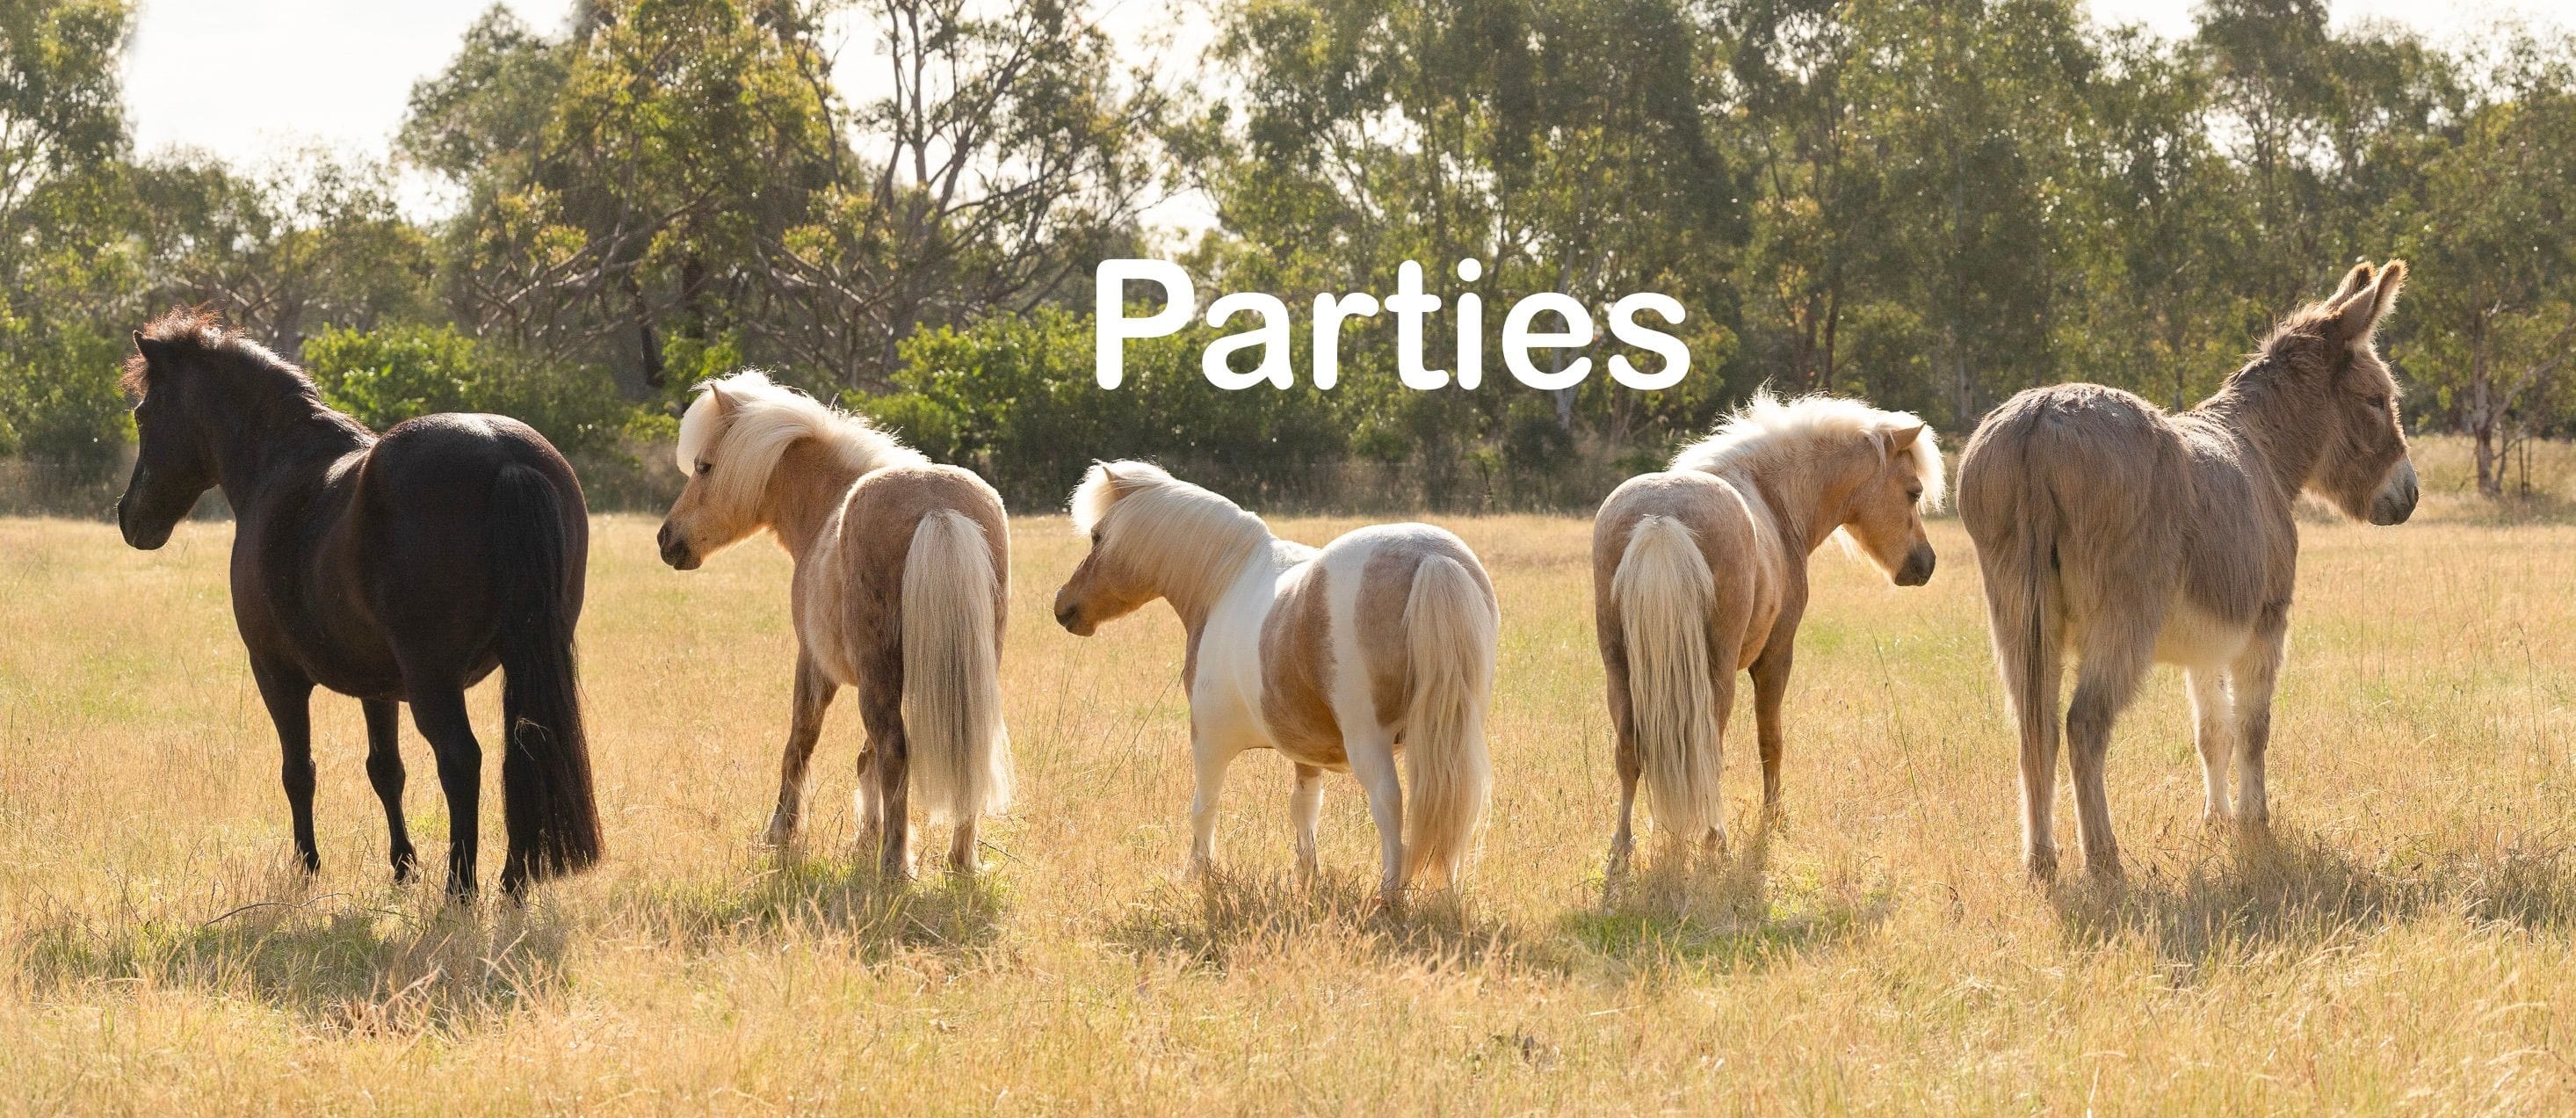 Ponies for Parties